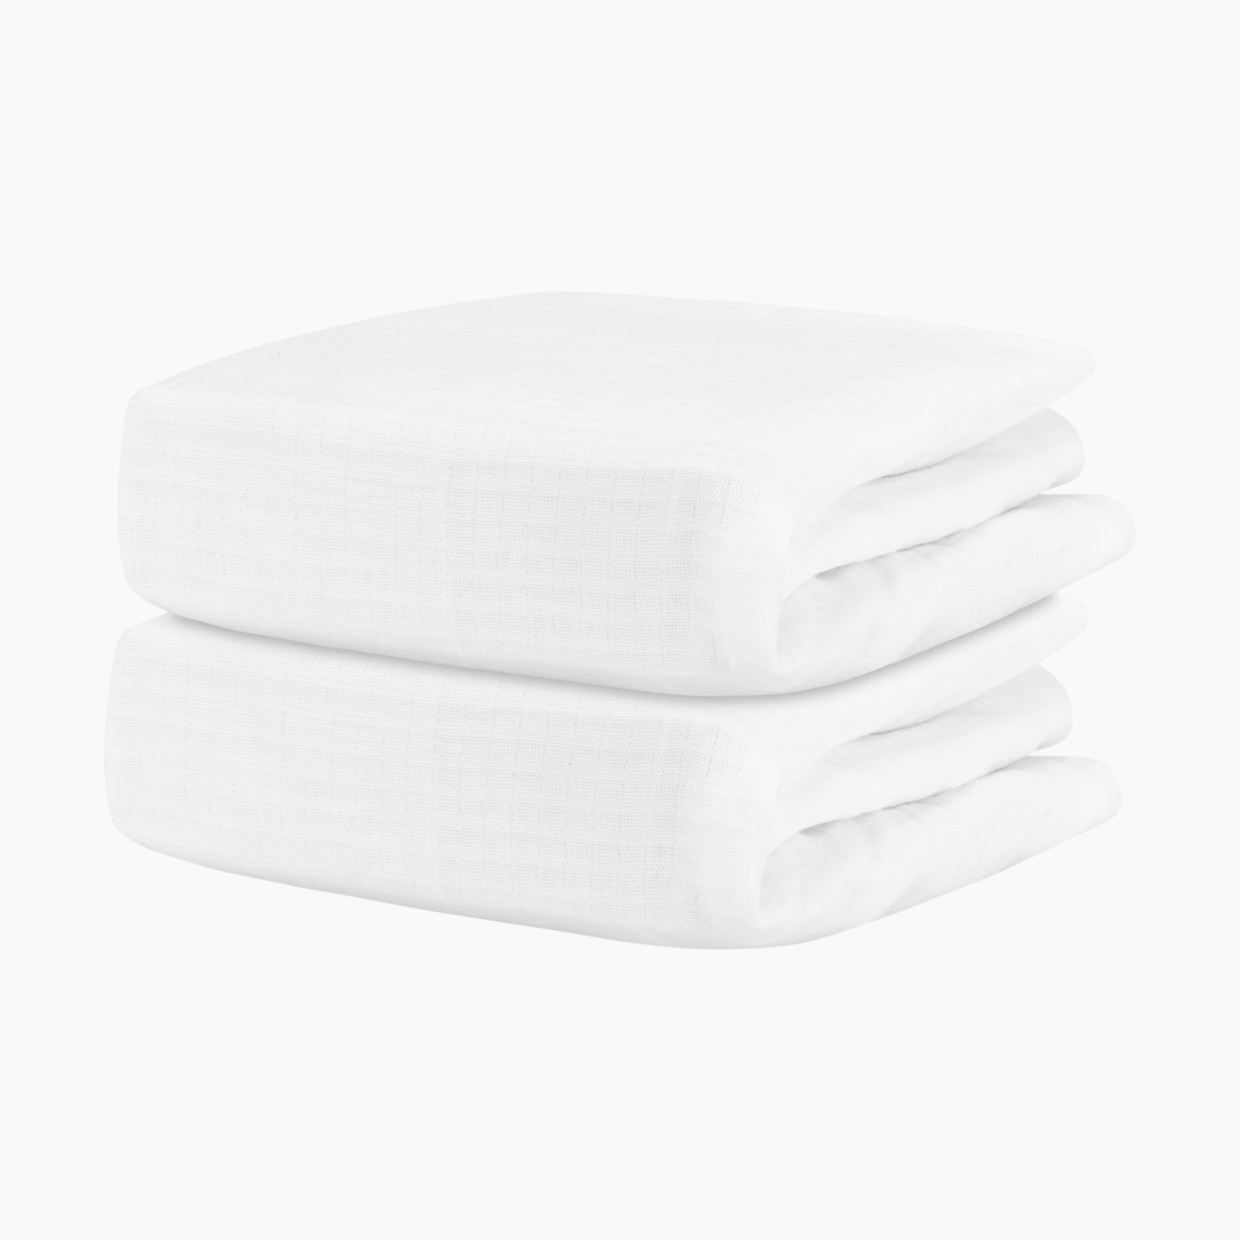 Newton Baby 2-Pack Organic Cotton Breathable Crib Sheets - Solid White 2 Pack.